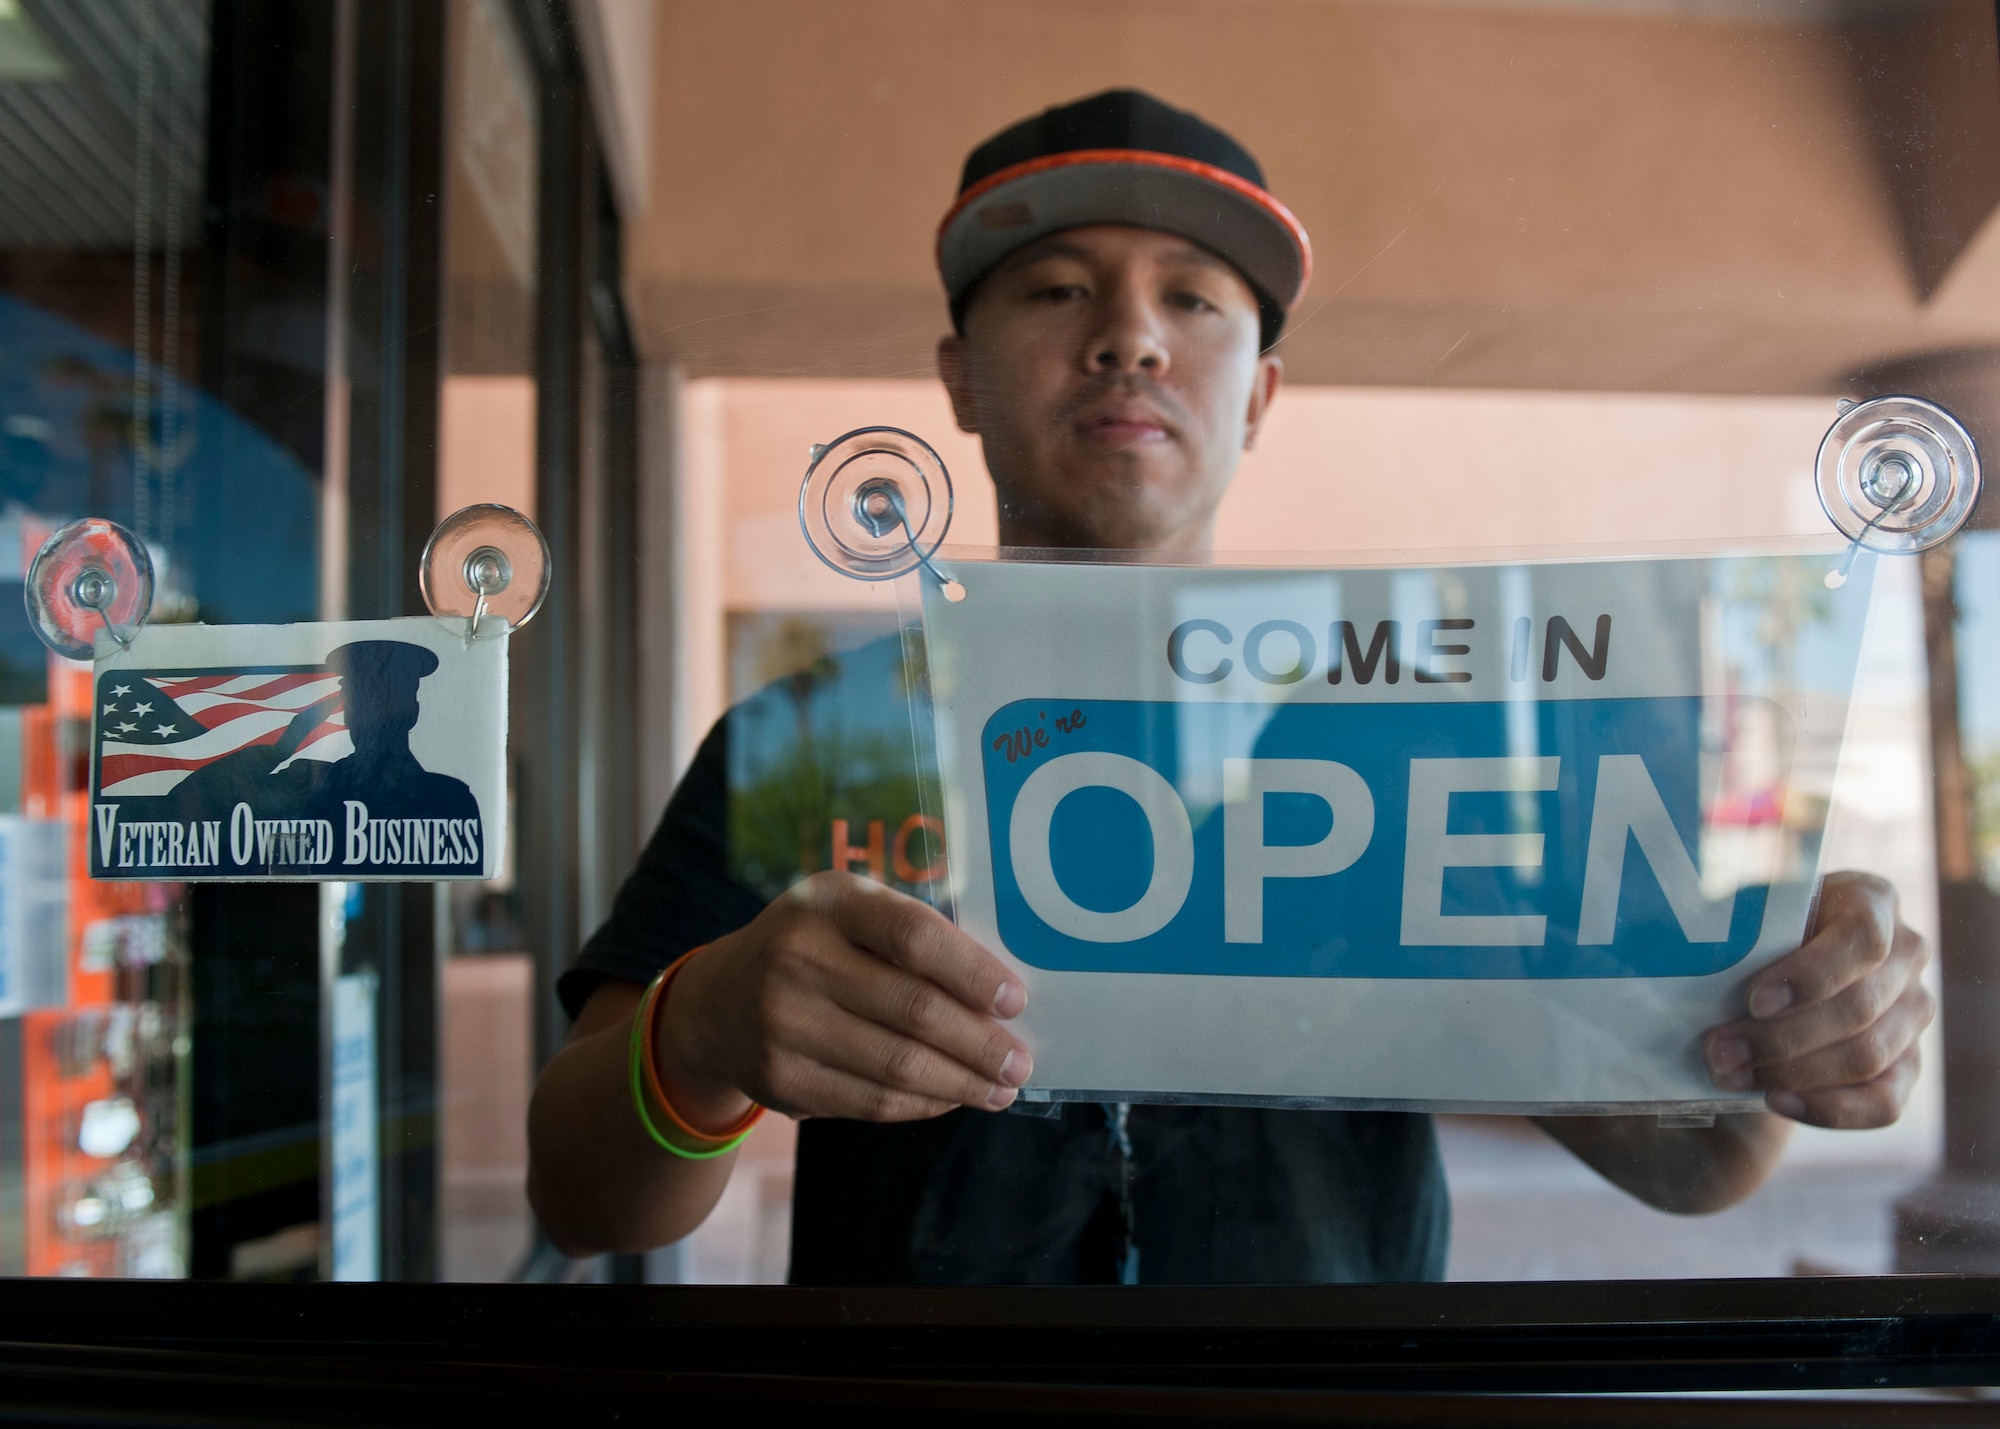 Retired Tech. Sgt. Alfredo Sibucao Jr. flips the open sign to his retail store in Las Vegas, June 22, 2015. Sibucao retired from the Air Force in 2014 and now owns and operates a small business in Las Vegas. (U.S. Air Force photo by Staff Sgt. Siuta B. Ika)